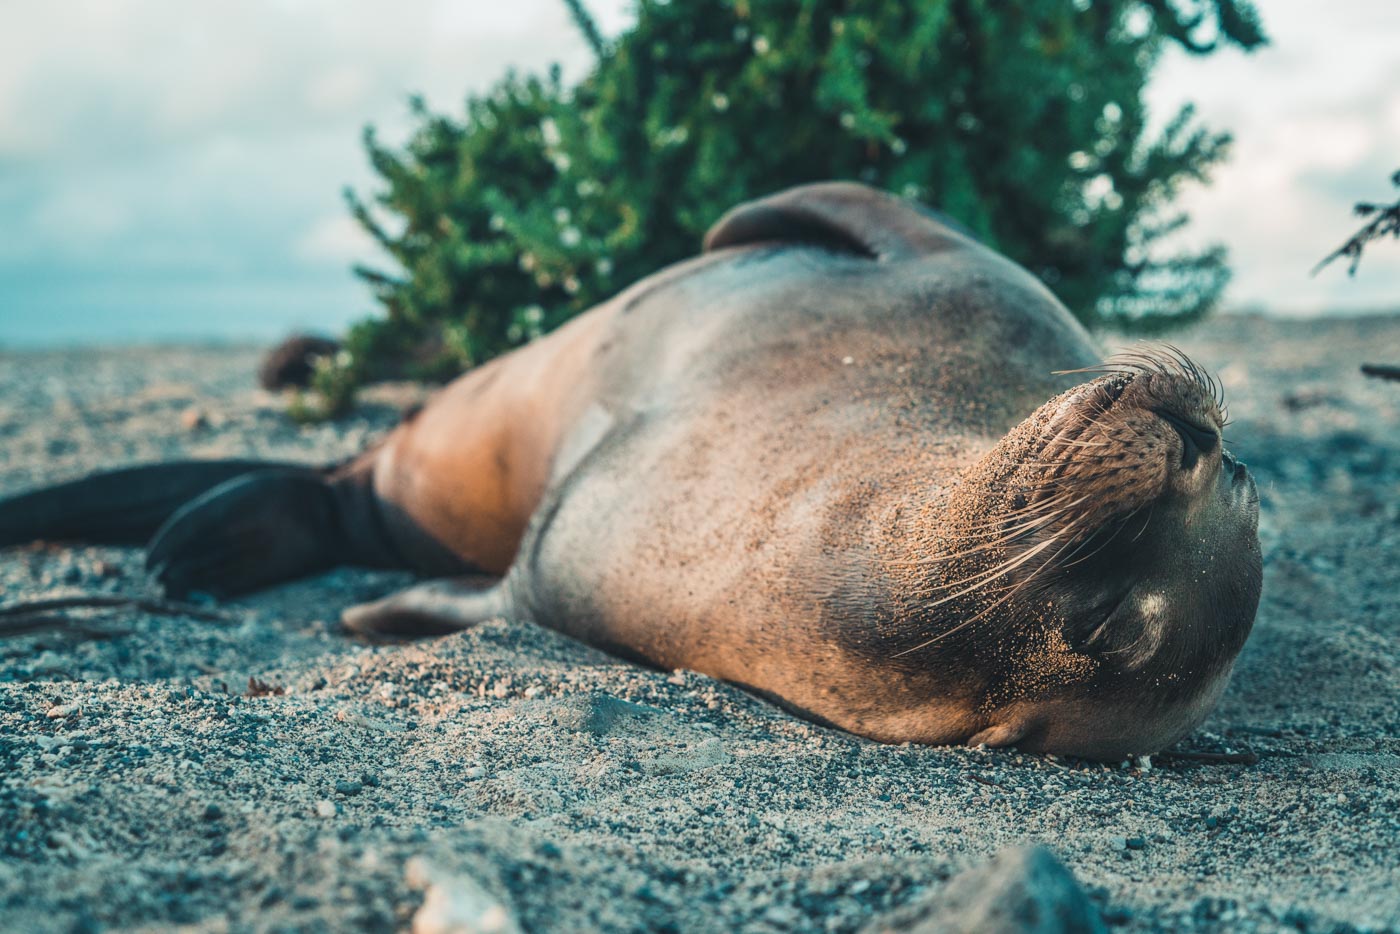 25 Photos That Will Make You Fall in Love With the Galapagos Islands